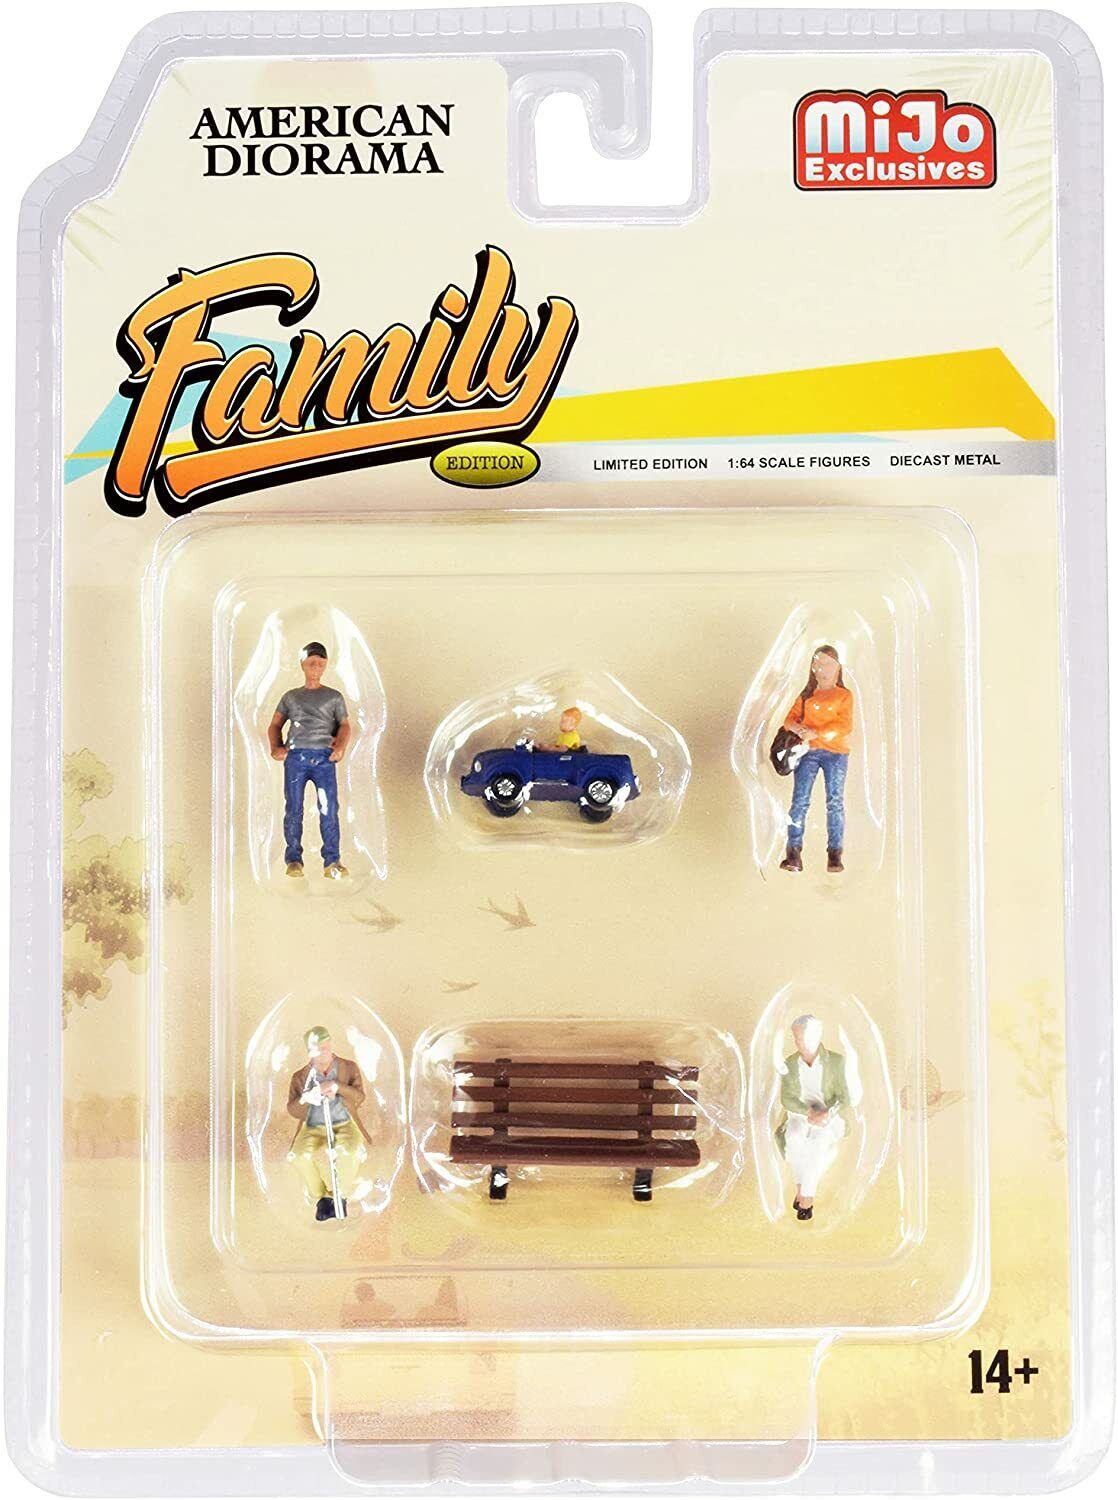  Family Edition Set of 6 (5 Figurines 1 Accessory) 1/64 American Diorama 76473